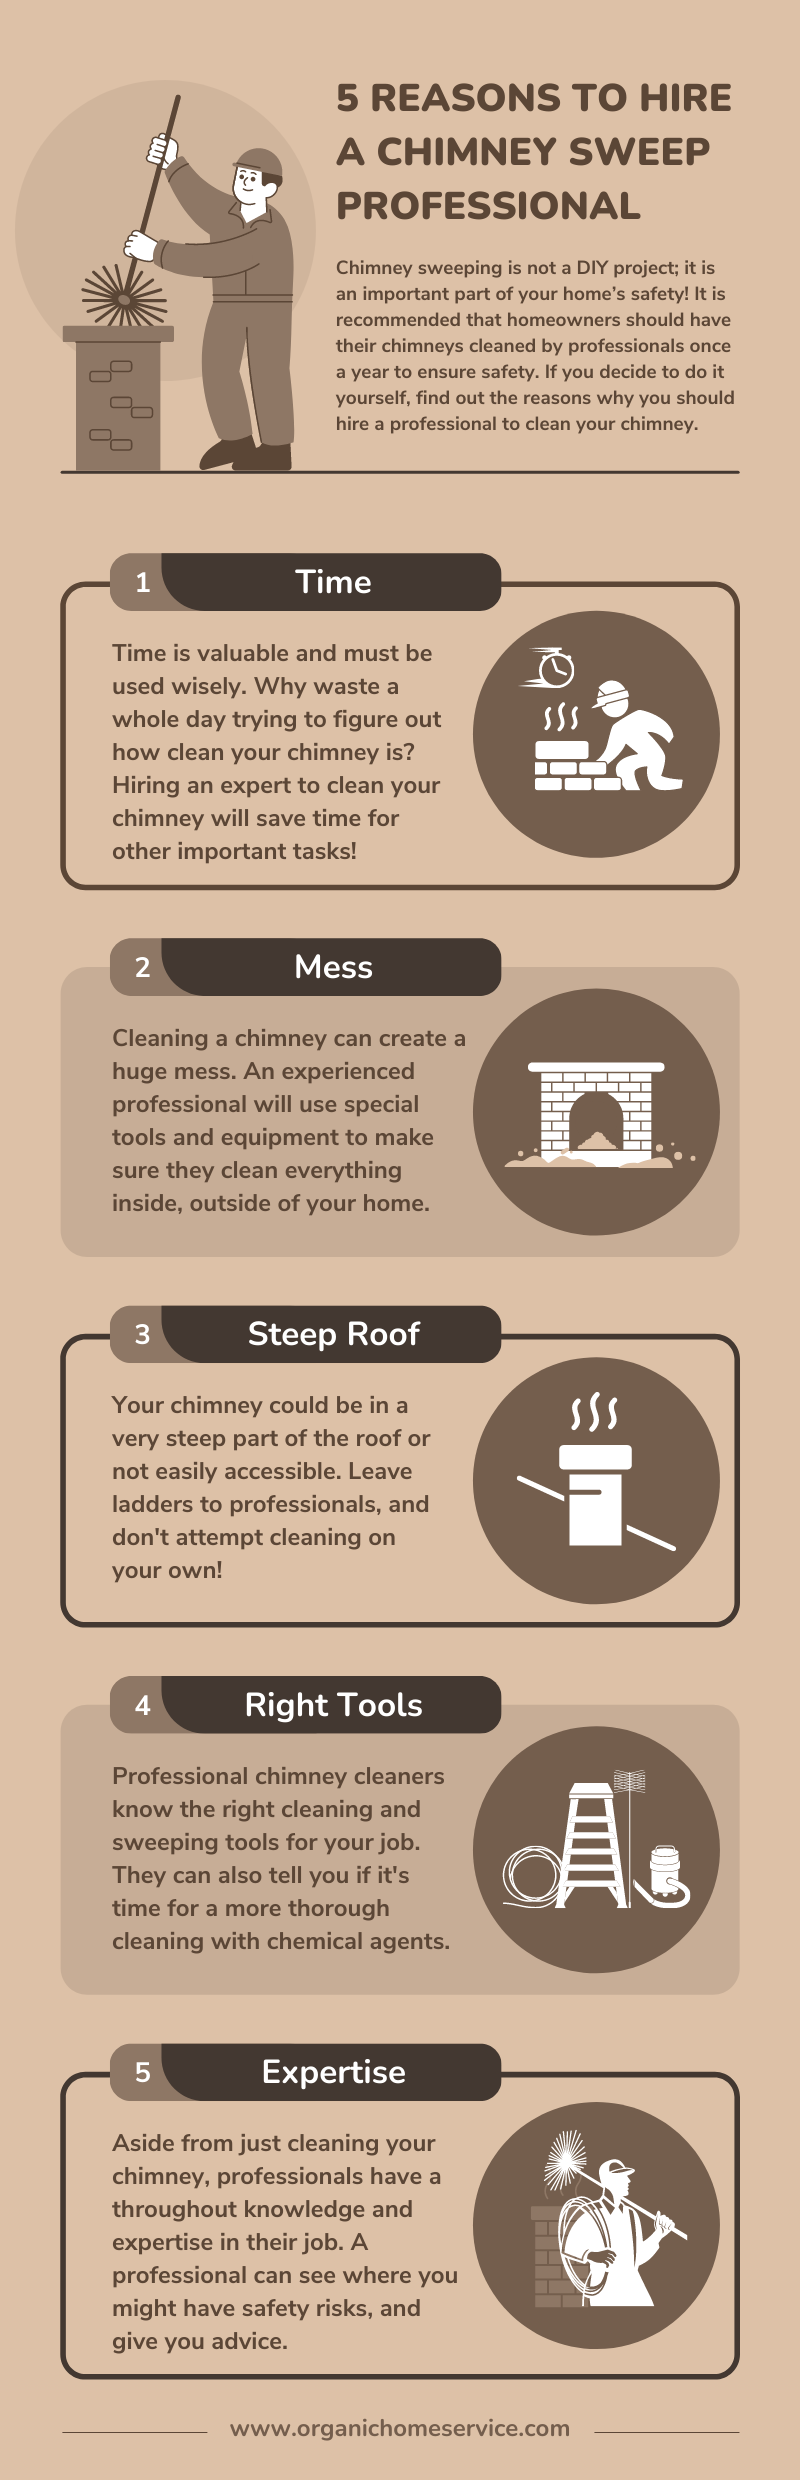 5 Reasons to Hire a Chimney Sweep Professional